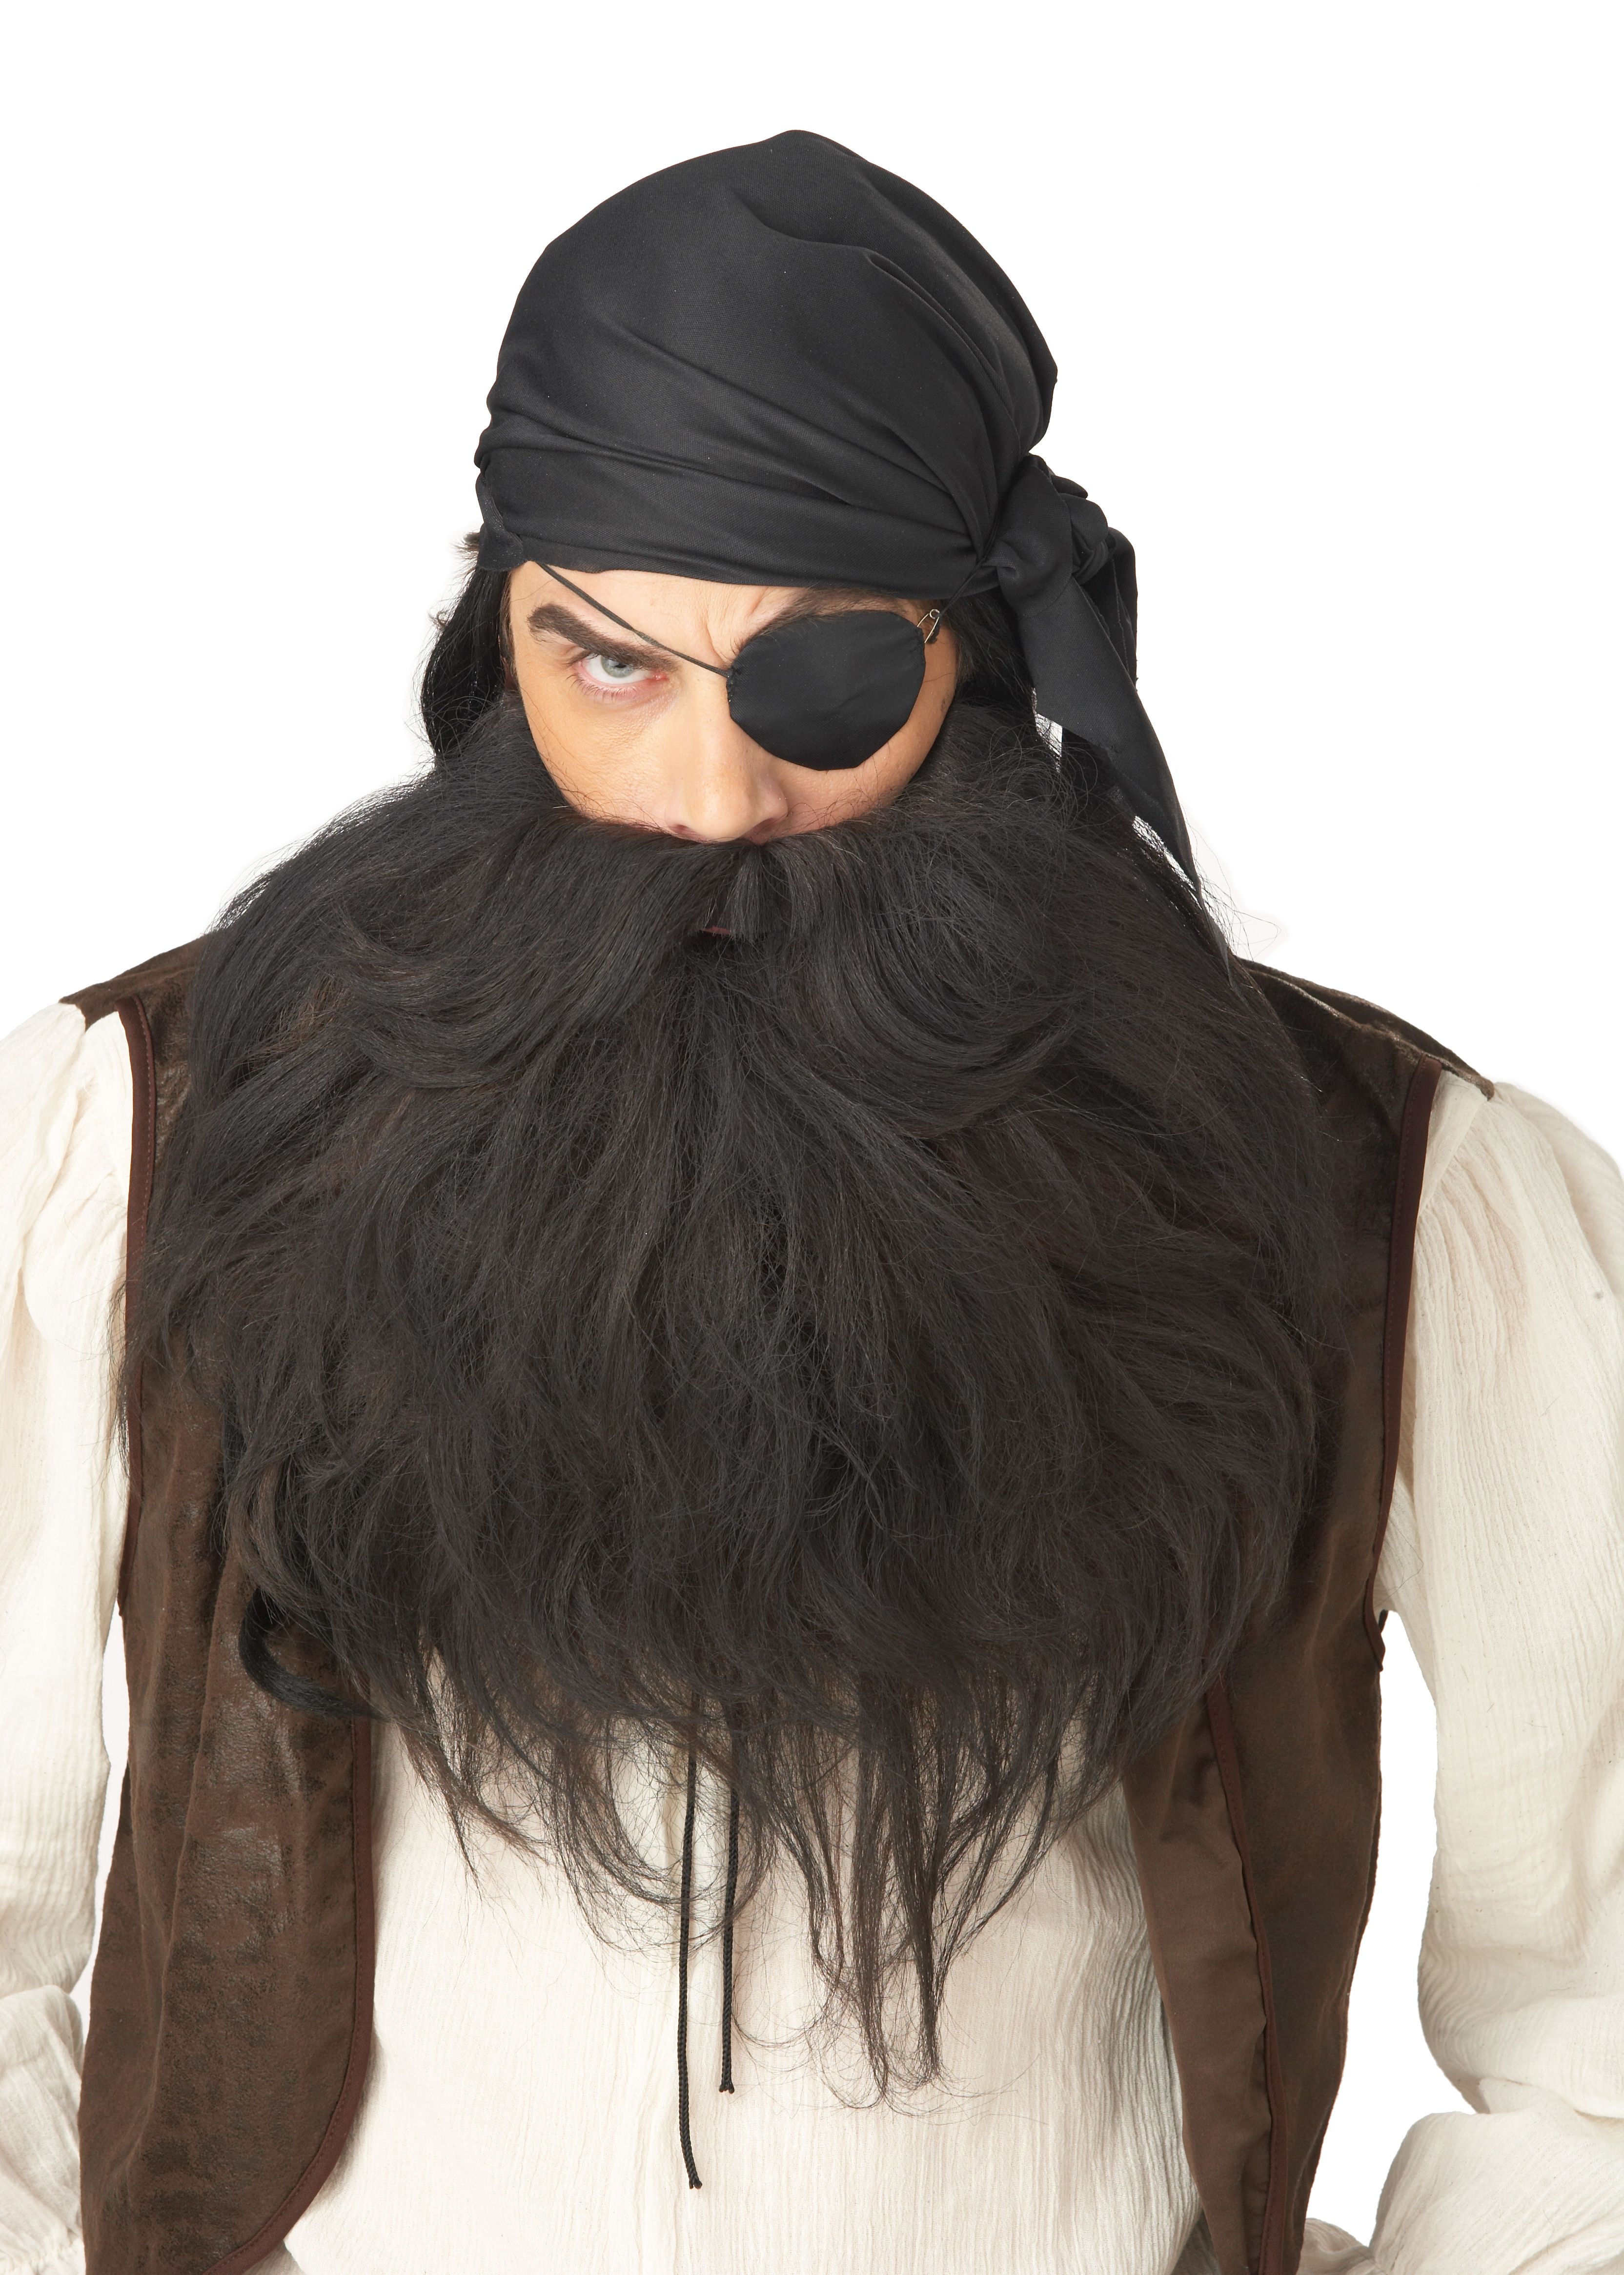 California Costume Collection Women's Pirate Beard and Moustache - Black